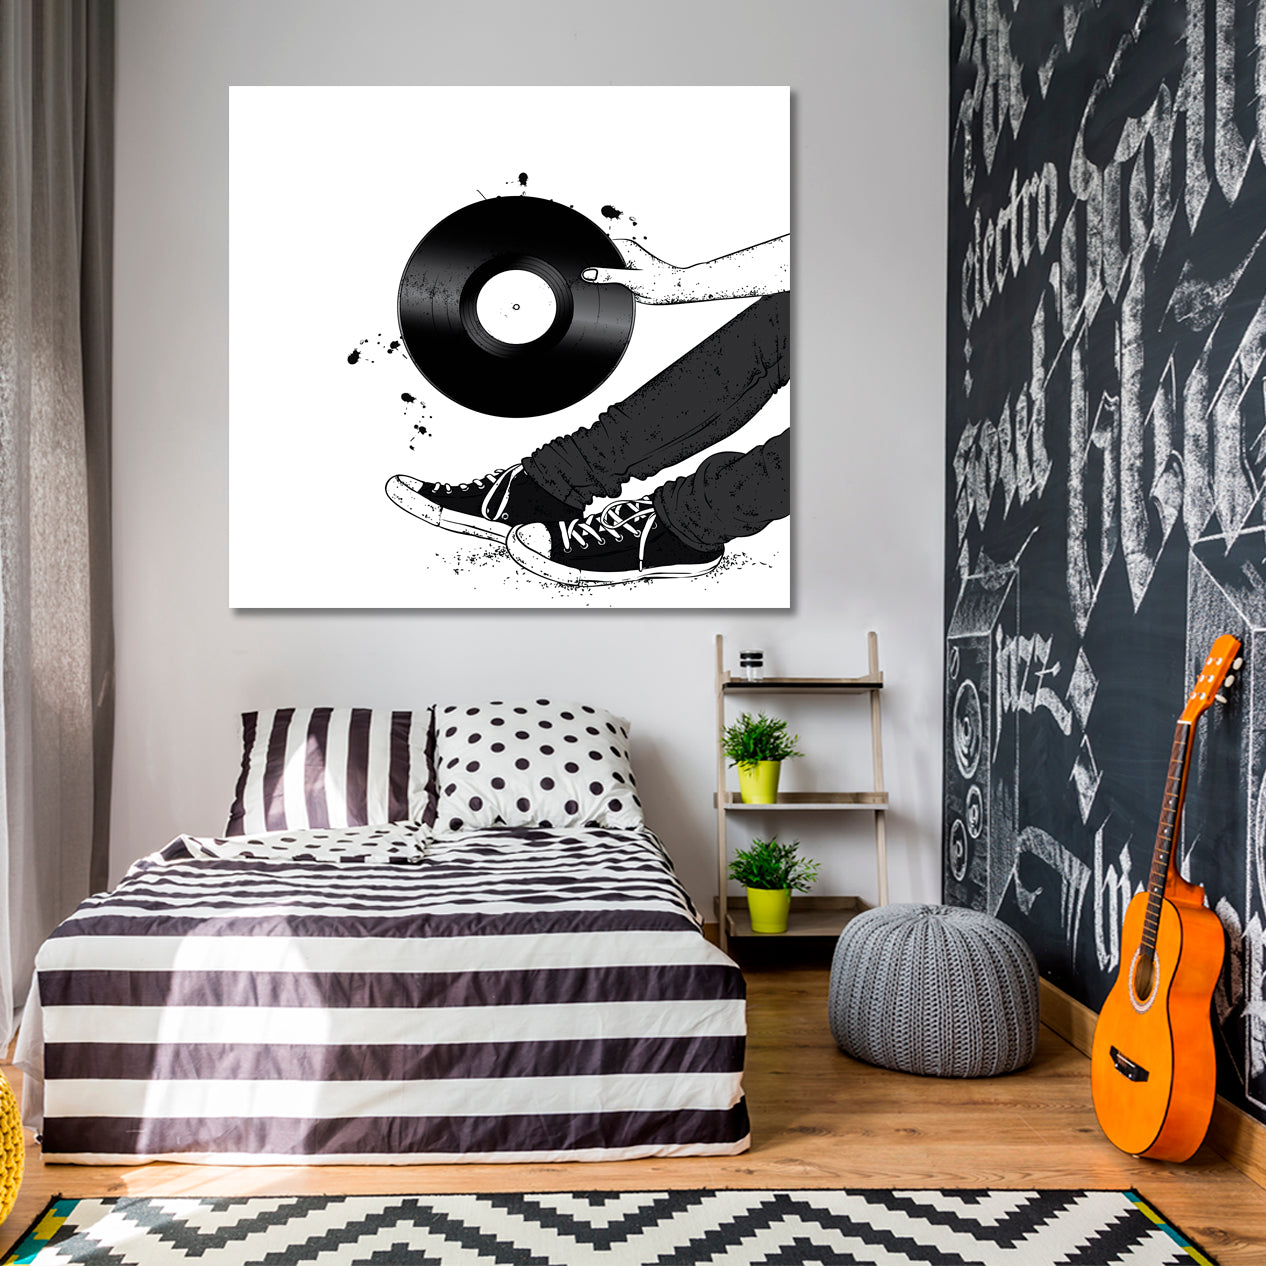 Hipster and Music Music Wall Panels Artesty   